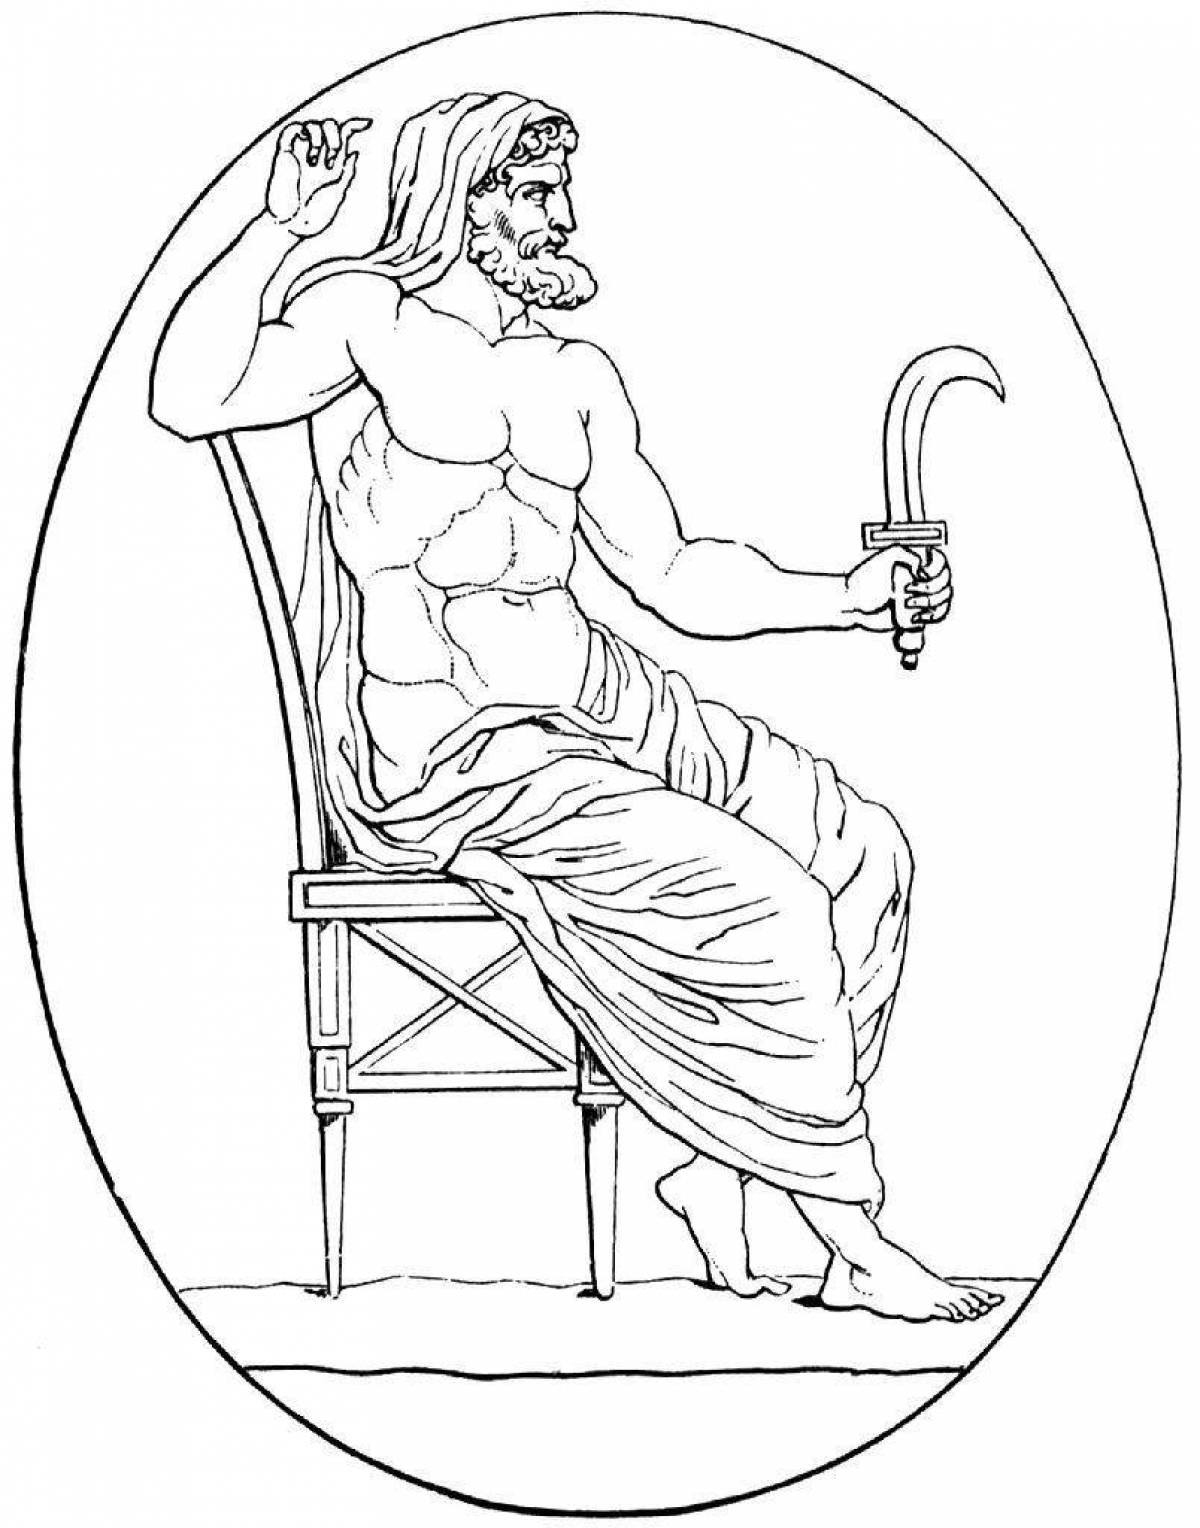 Exalted greek gods coloring page